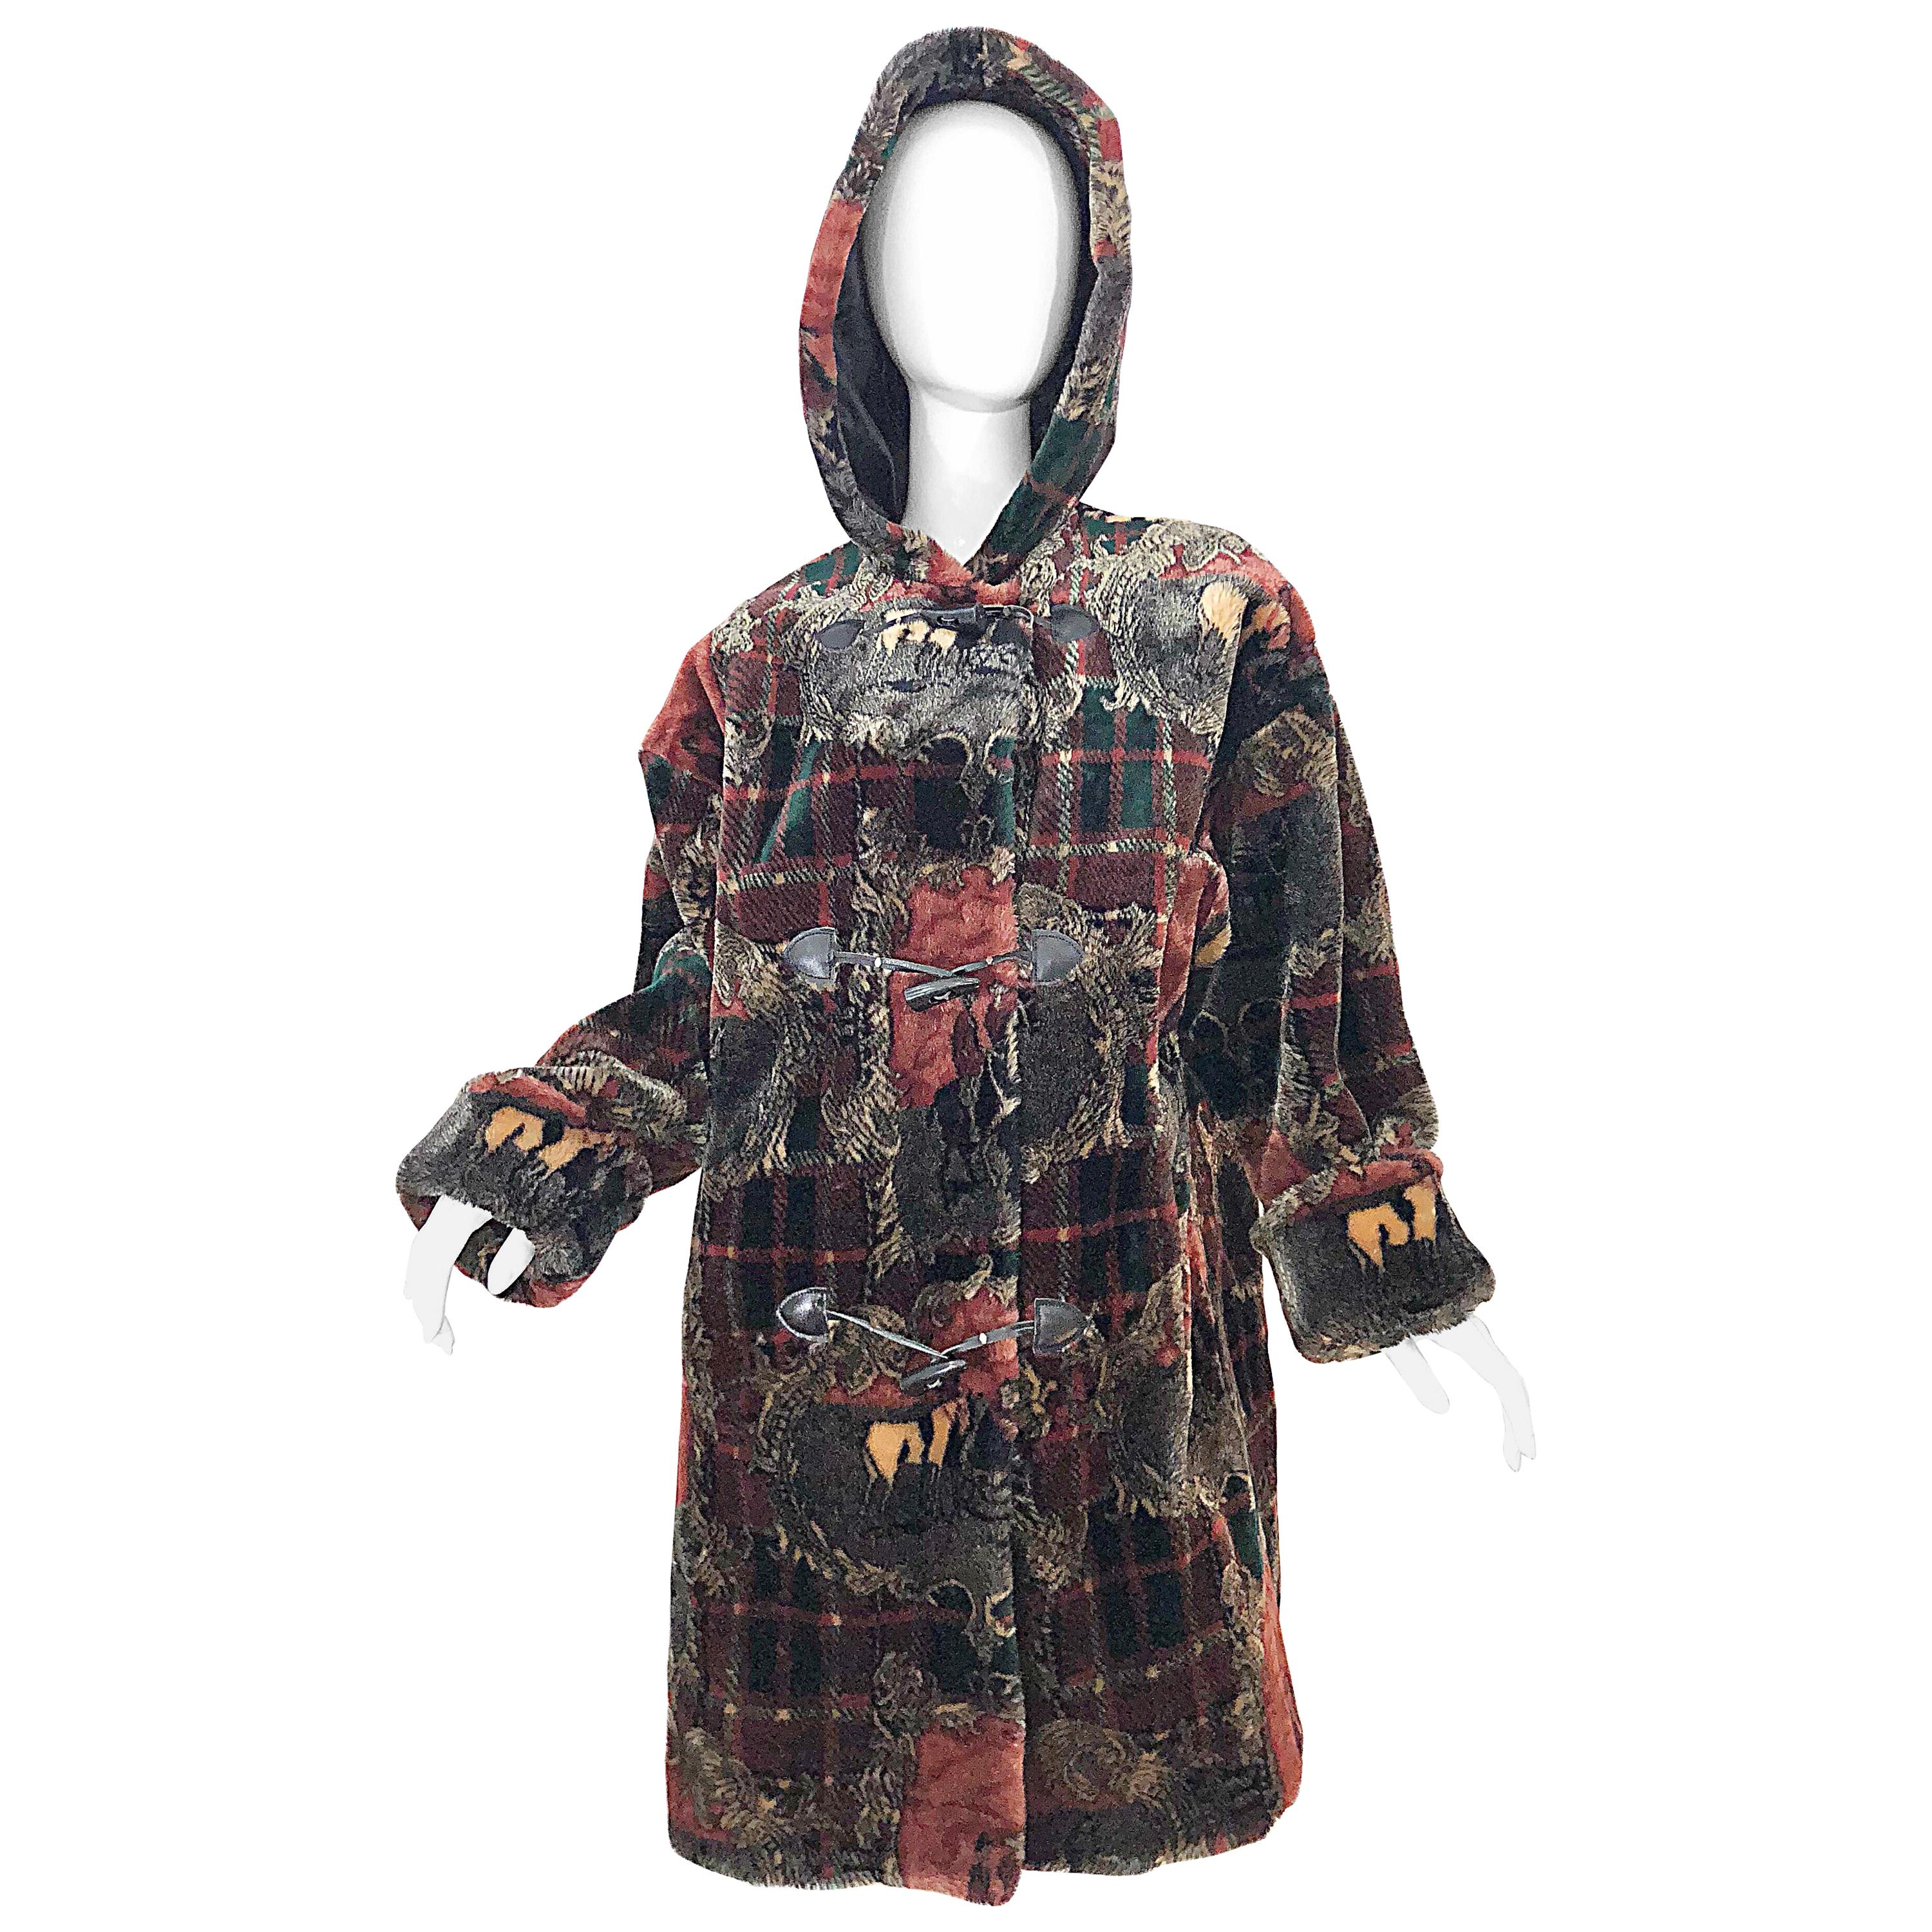 Extra Plush Vintage Faux Fur Equestrian Plaid Print Oversized Hooded Jacket For Sale